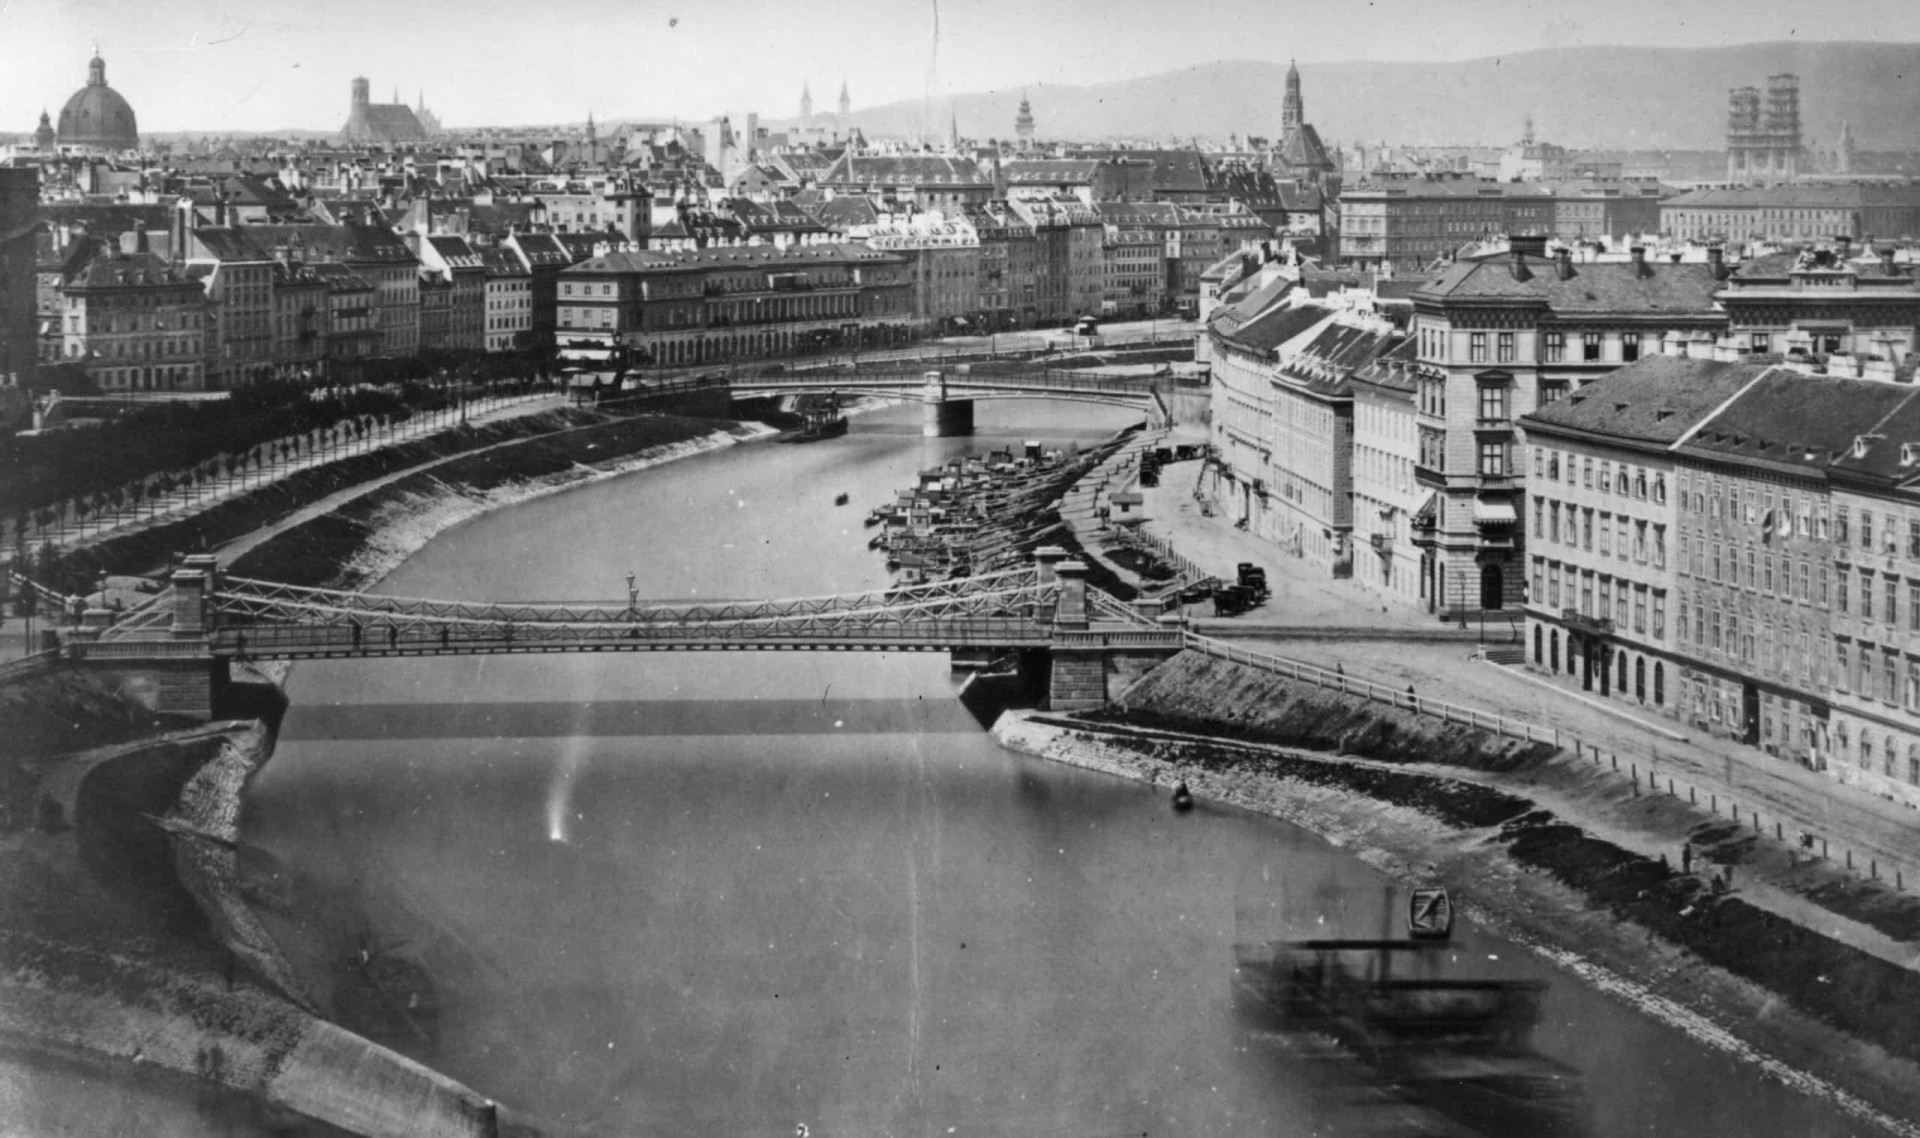 Taken back in 1864, this photo offers an alternative view of Vienna's famed Danube Canal.<p>You may also like:<a href="https://www.starsinsider.com/n/472561?utm_source=msn.com&utm_medium=display&utm_campaign=referral_description&utm_content=397441v1en-us"> These celebrities live in surprisingly modest homes</a></p>